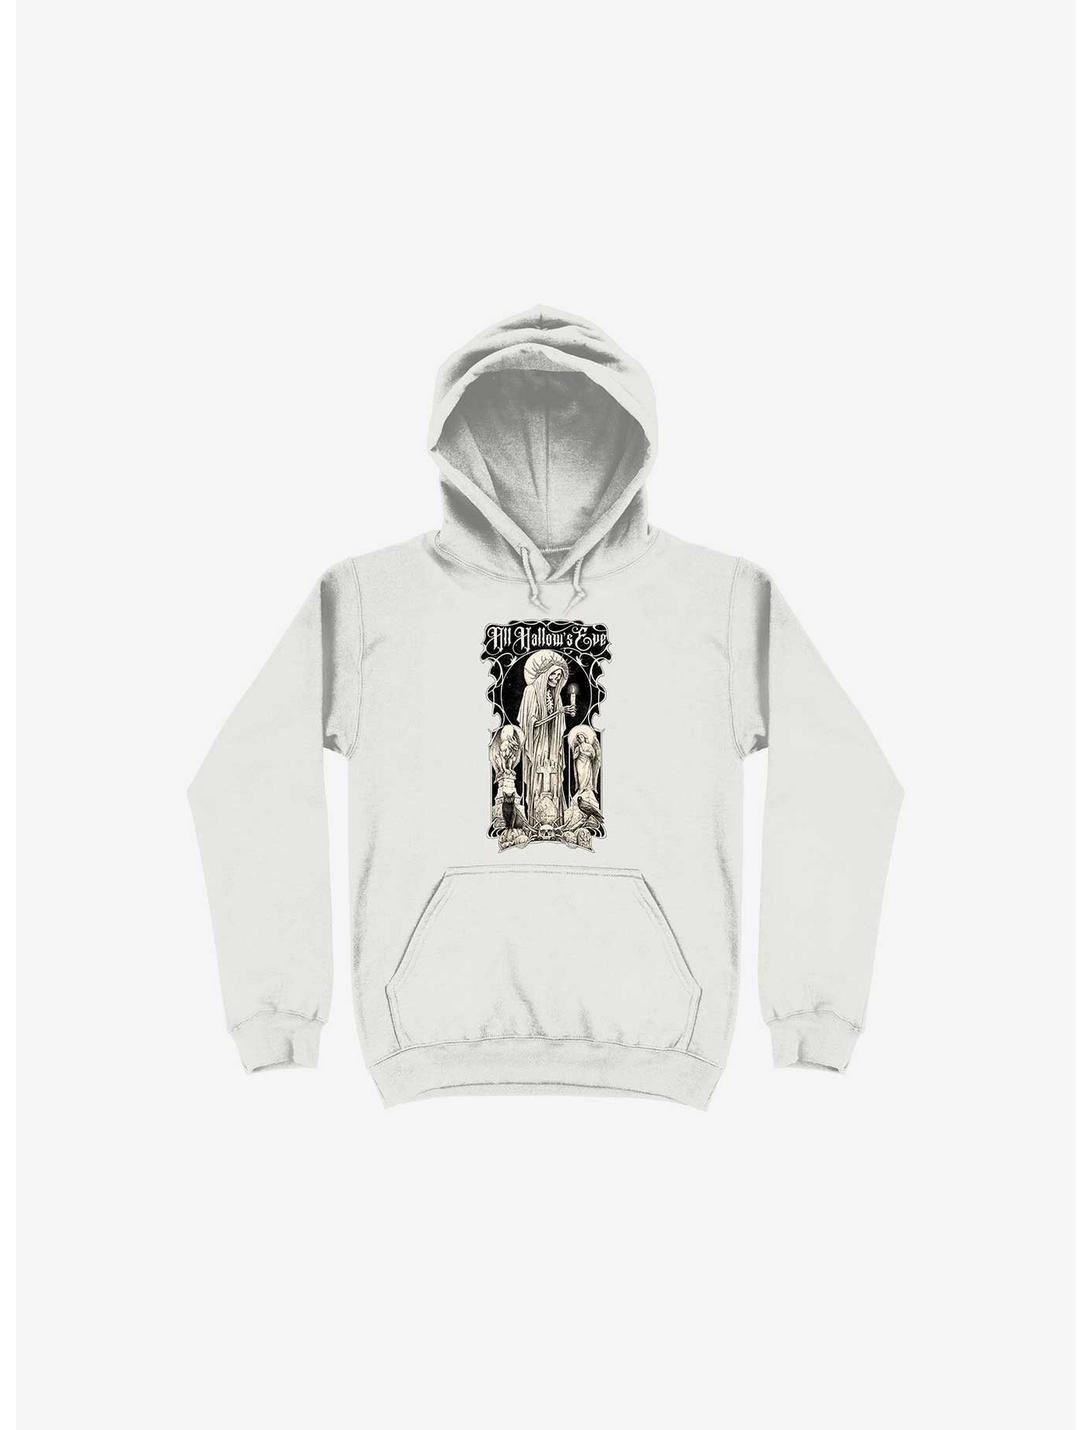 All Hallow's Eve White Hoodie, WHITE, hi-res